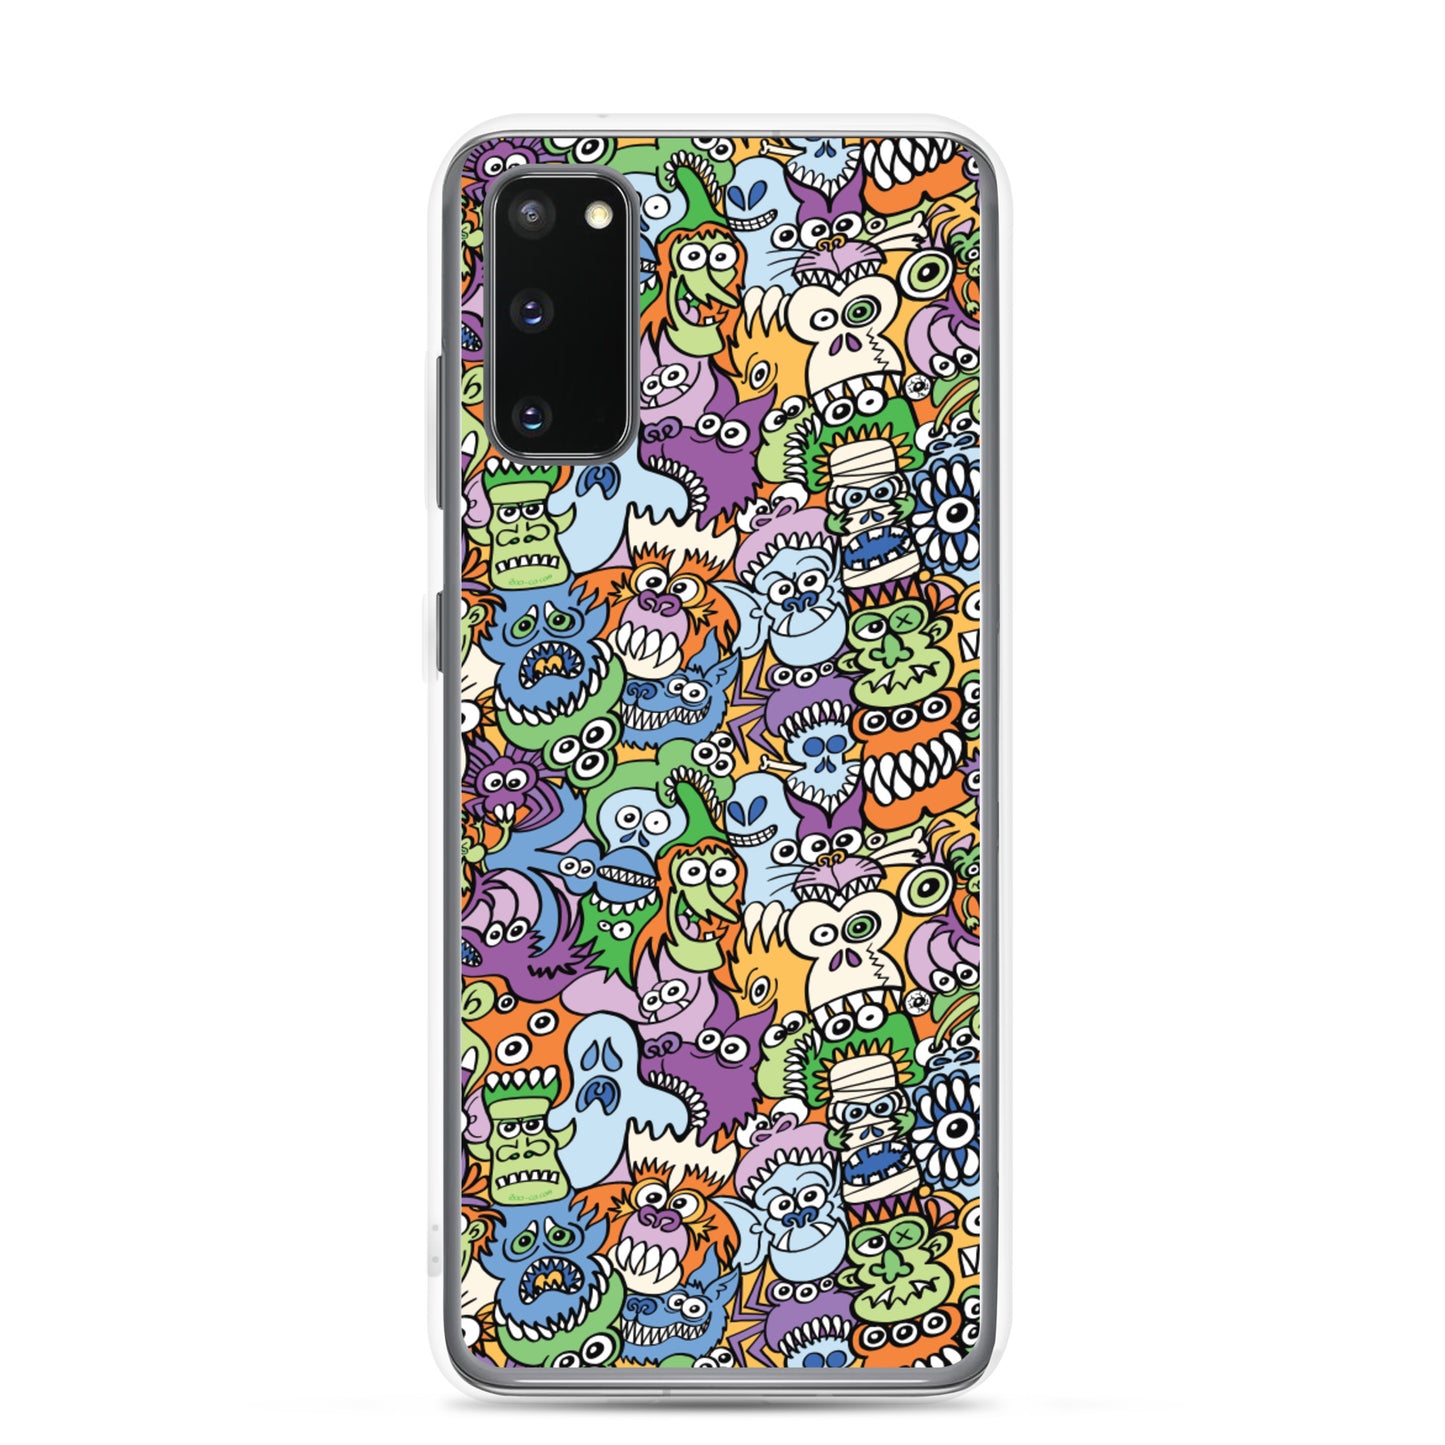 All the spooky Halloween monsters in a pattern design Samsung Case. s20